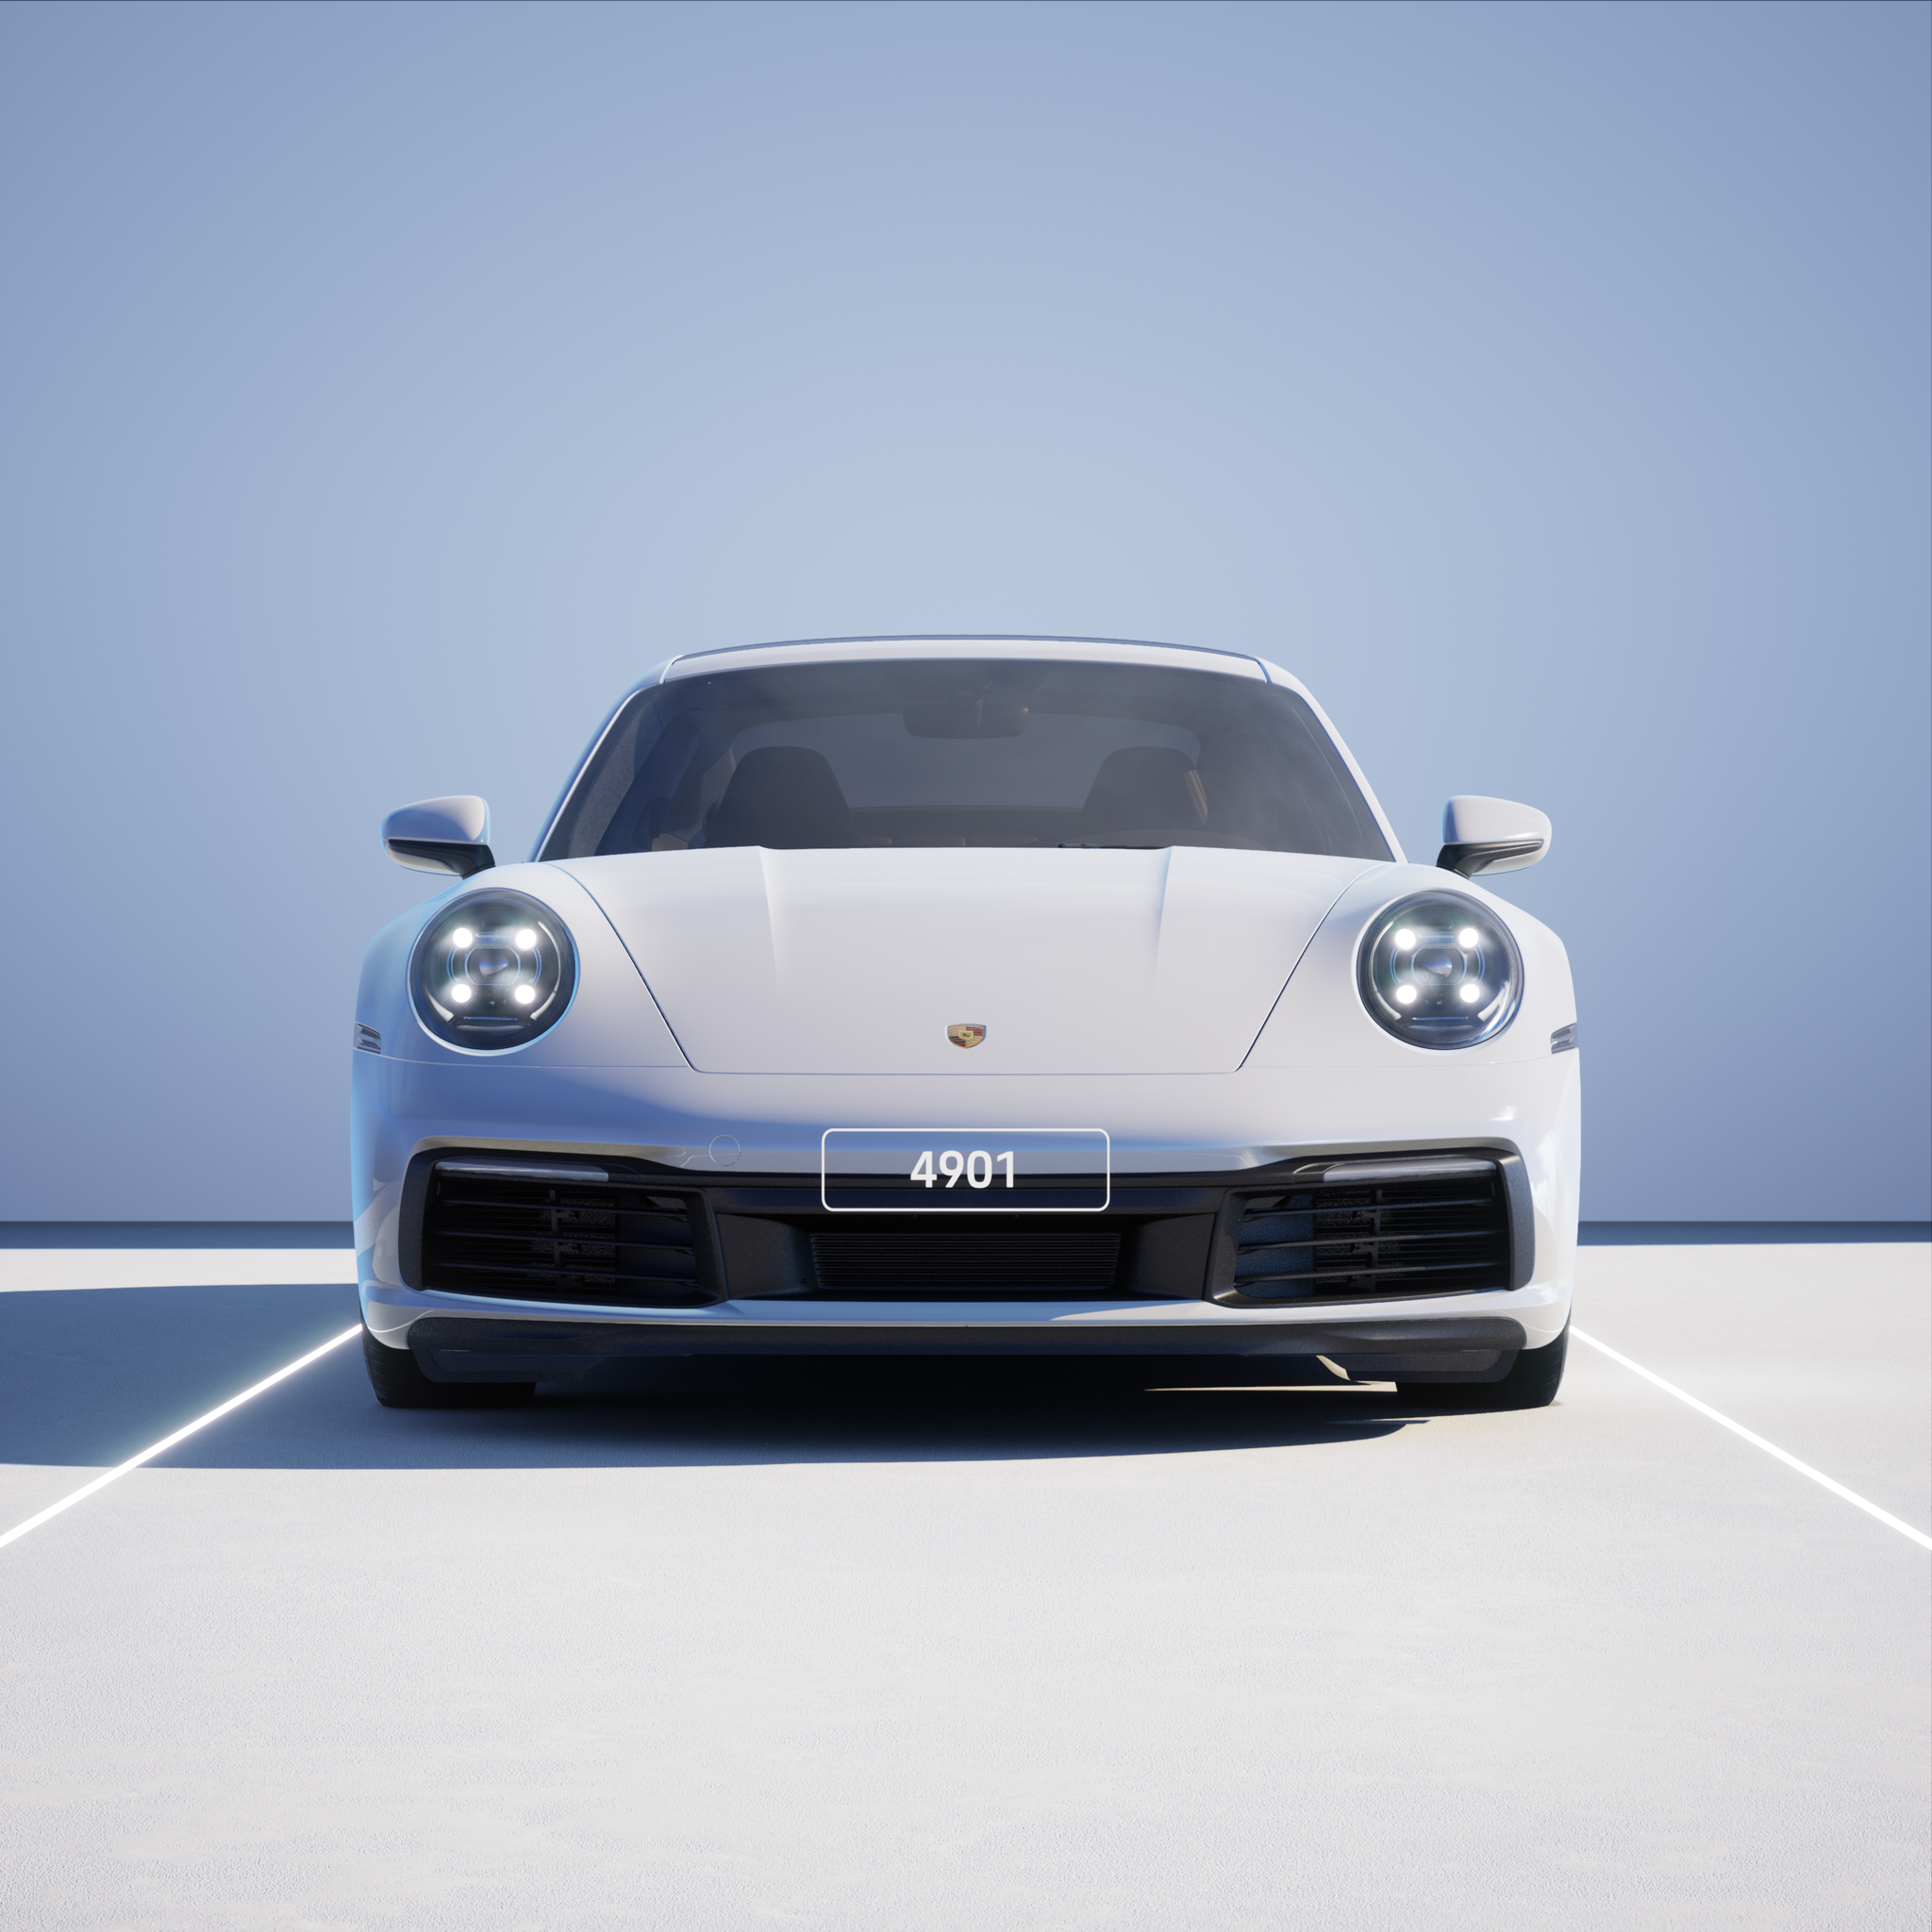 The PORSCHΞ 911 4901 image in phase